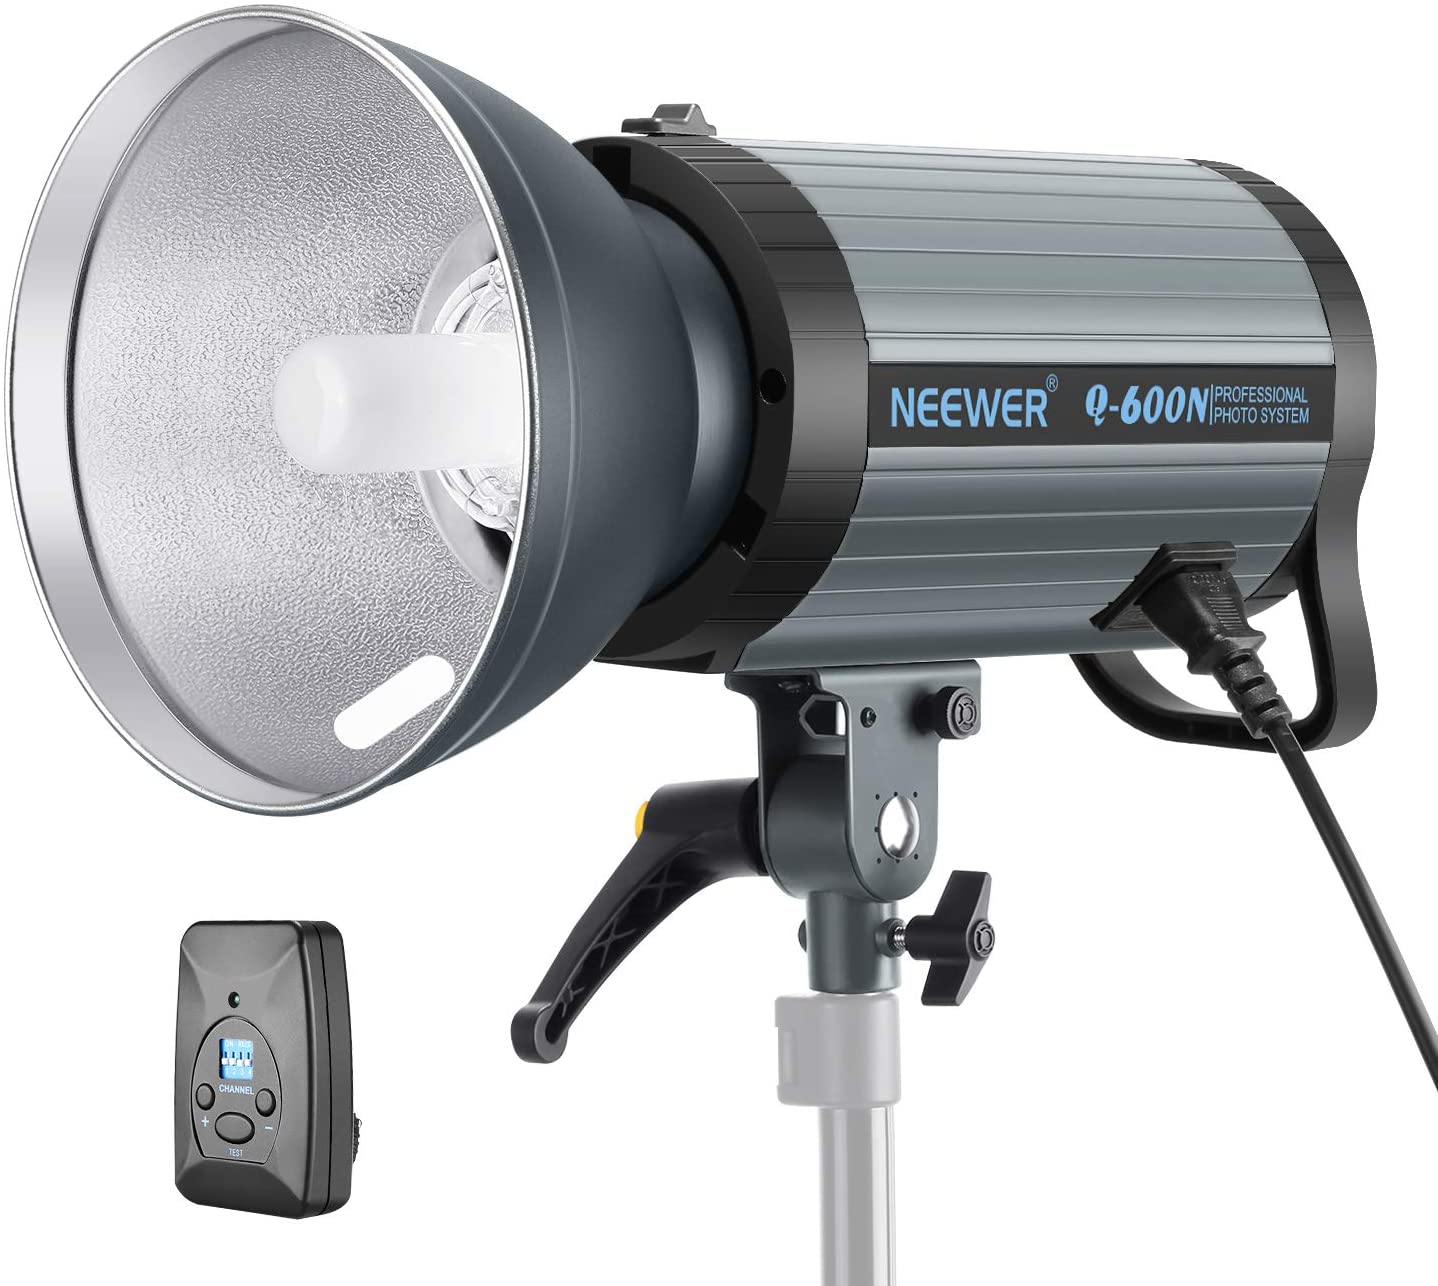 B07PTNVVGX Neewer 600W GN82 Studio Flash Strobe Light Monolight with 2.4G Wireless Trigger and Modeling Lamp, Recycle in 0.01-1.2 Sec, Bowens Mount for Indoor Studio Portrait Photography(Q600N)